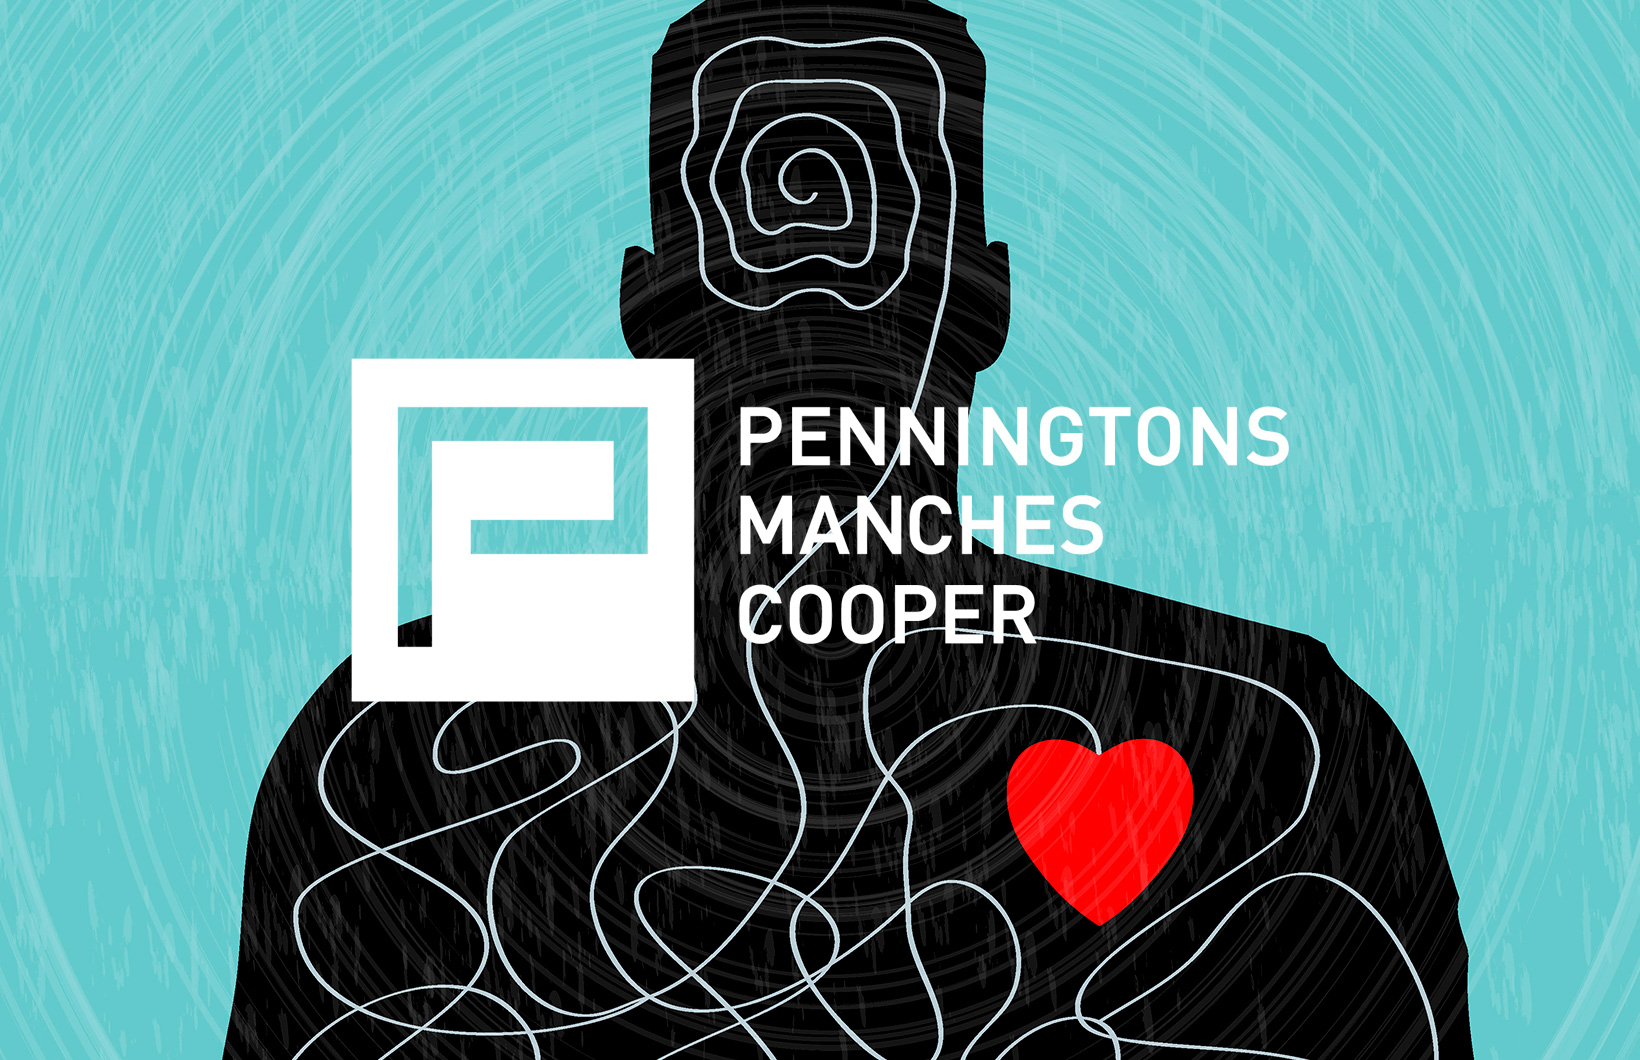 Penningtons Manches Cooper project